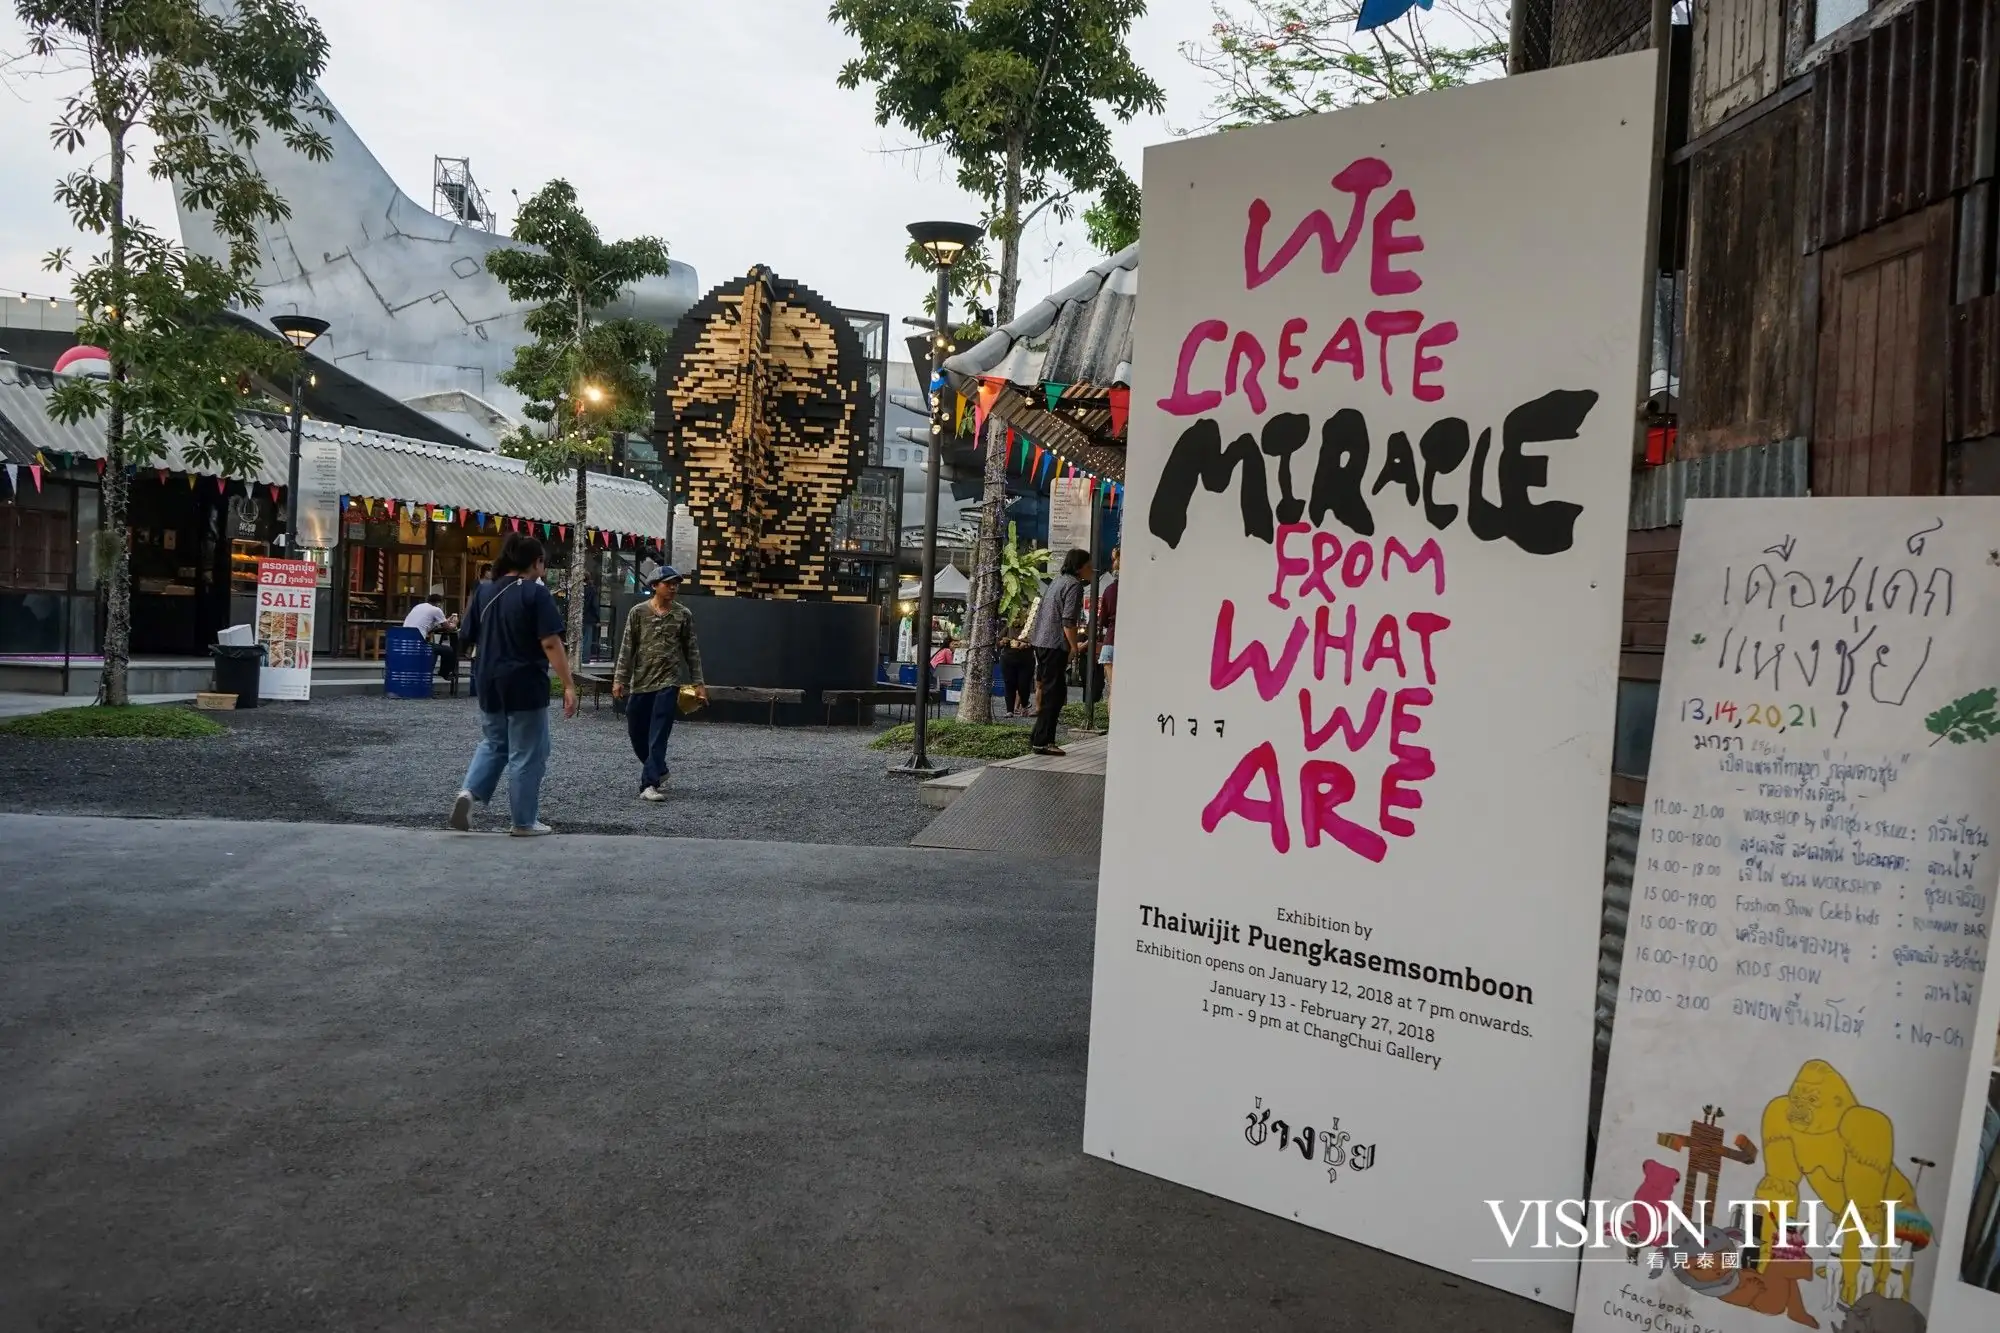 We Create Miracle from What We Are : Exhibition by Thaiwijit創意展在暢萃文創園區